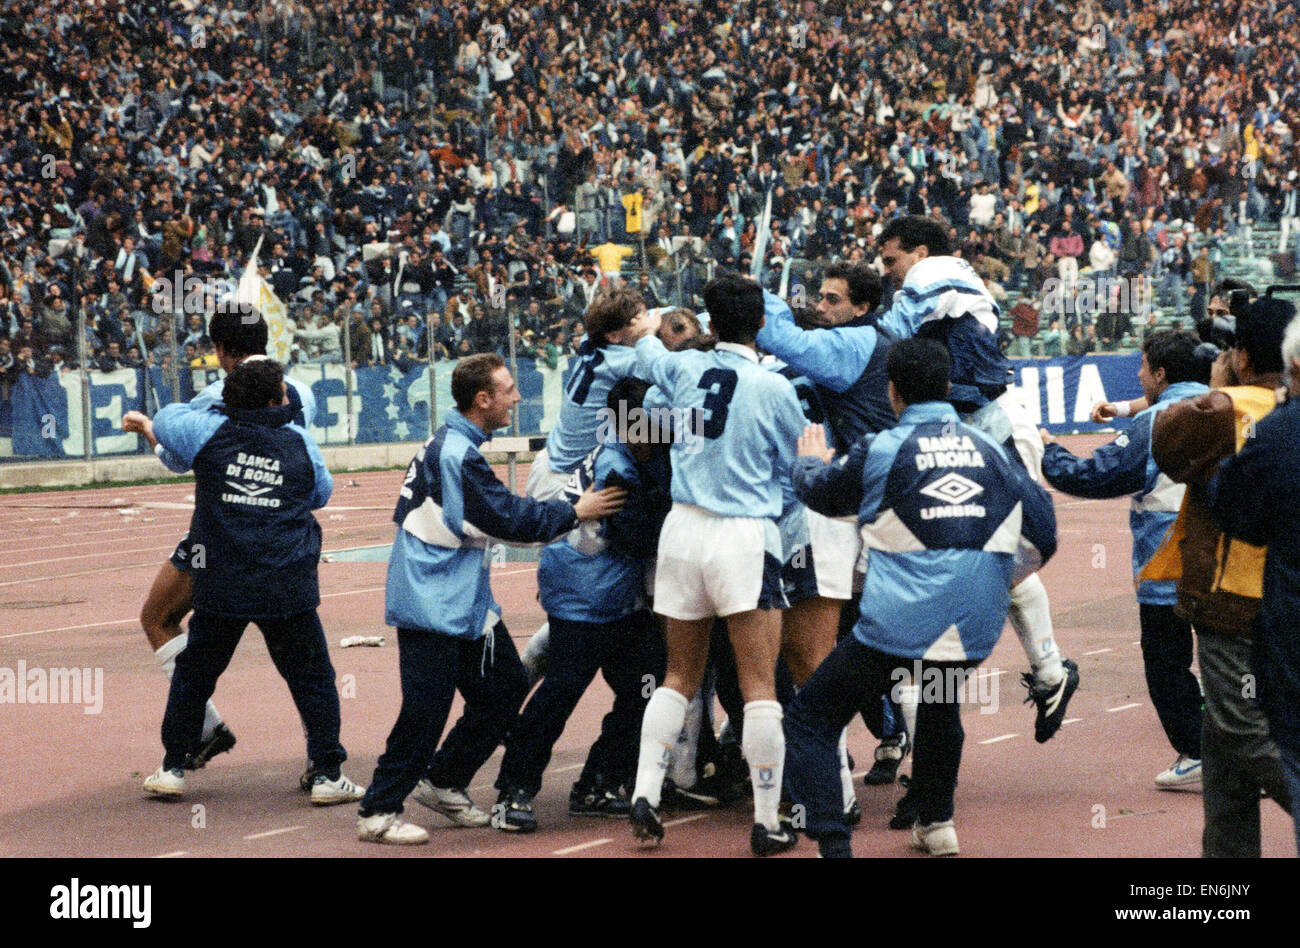 Serie A League match at the Stadio Olimpico, Rome. Lazio 1 v AS Roma 1. Paul Gascoigne is mobbed by teammates after scoring his dramatic last gasp equaliser against local rivals Roma to secure a point in the Rome derby. 30th November 1992. Stock Photo